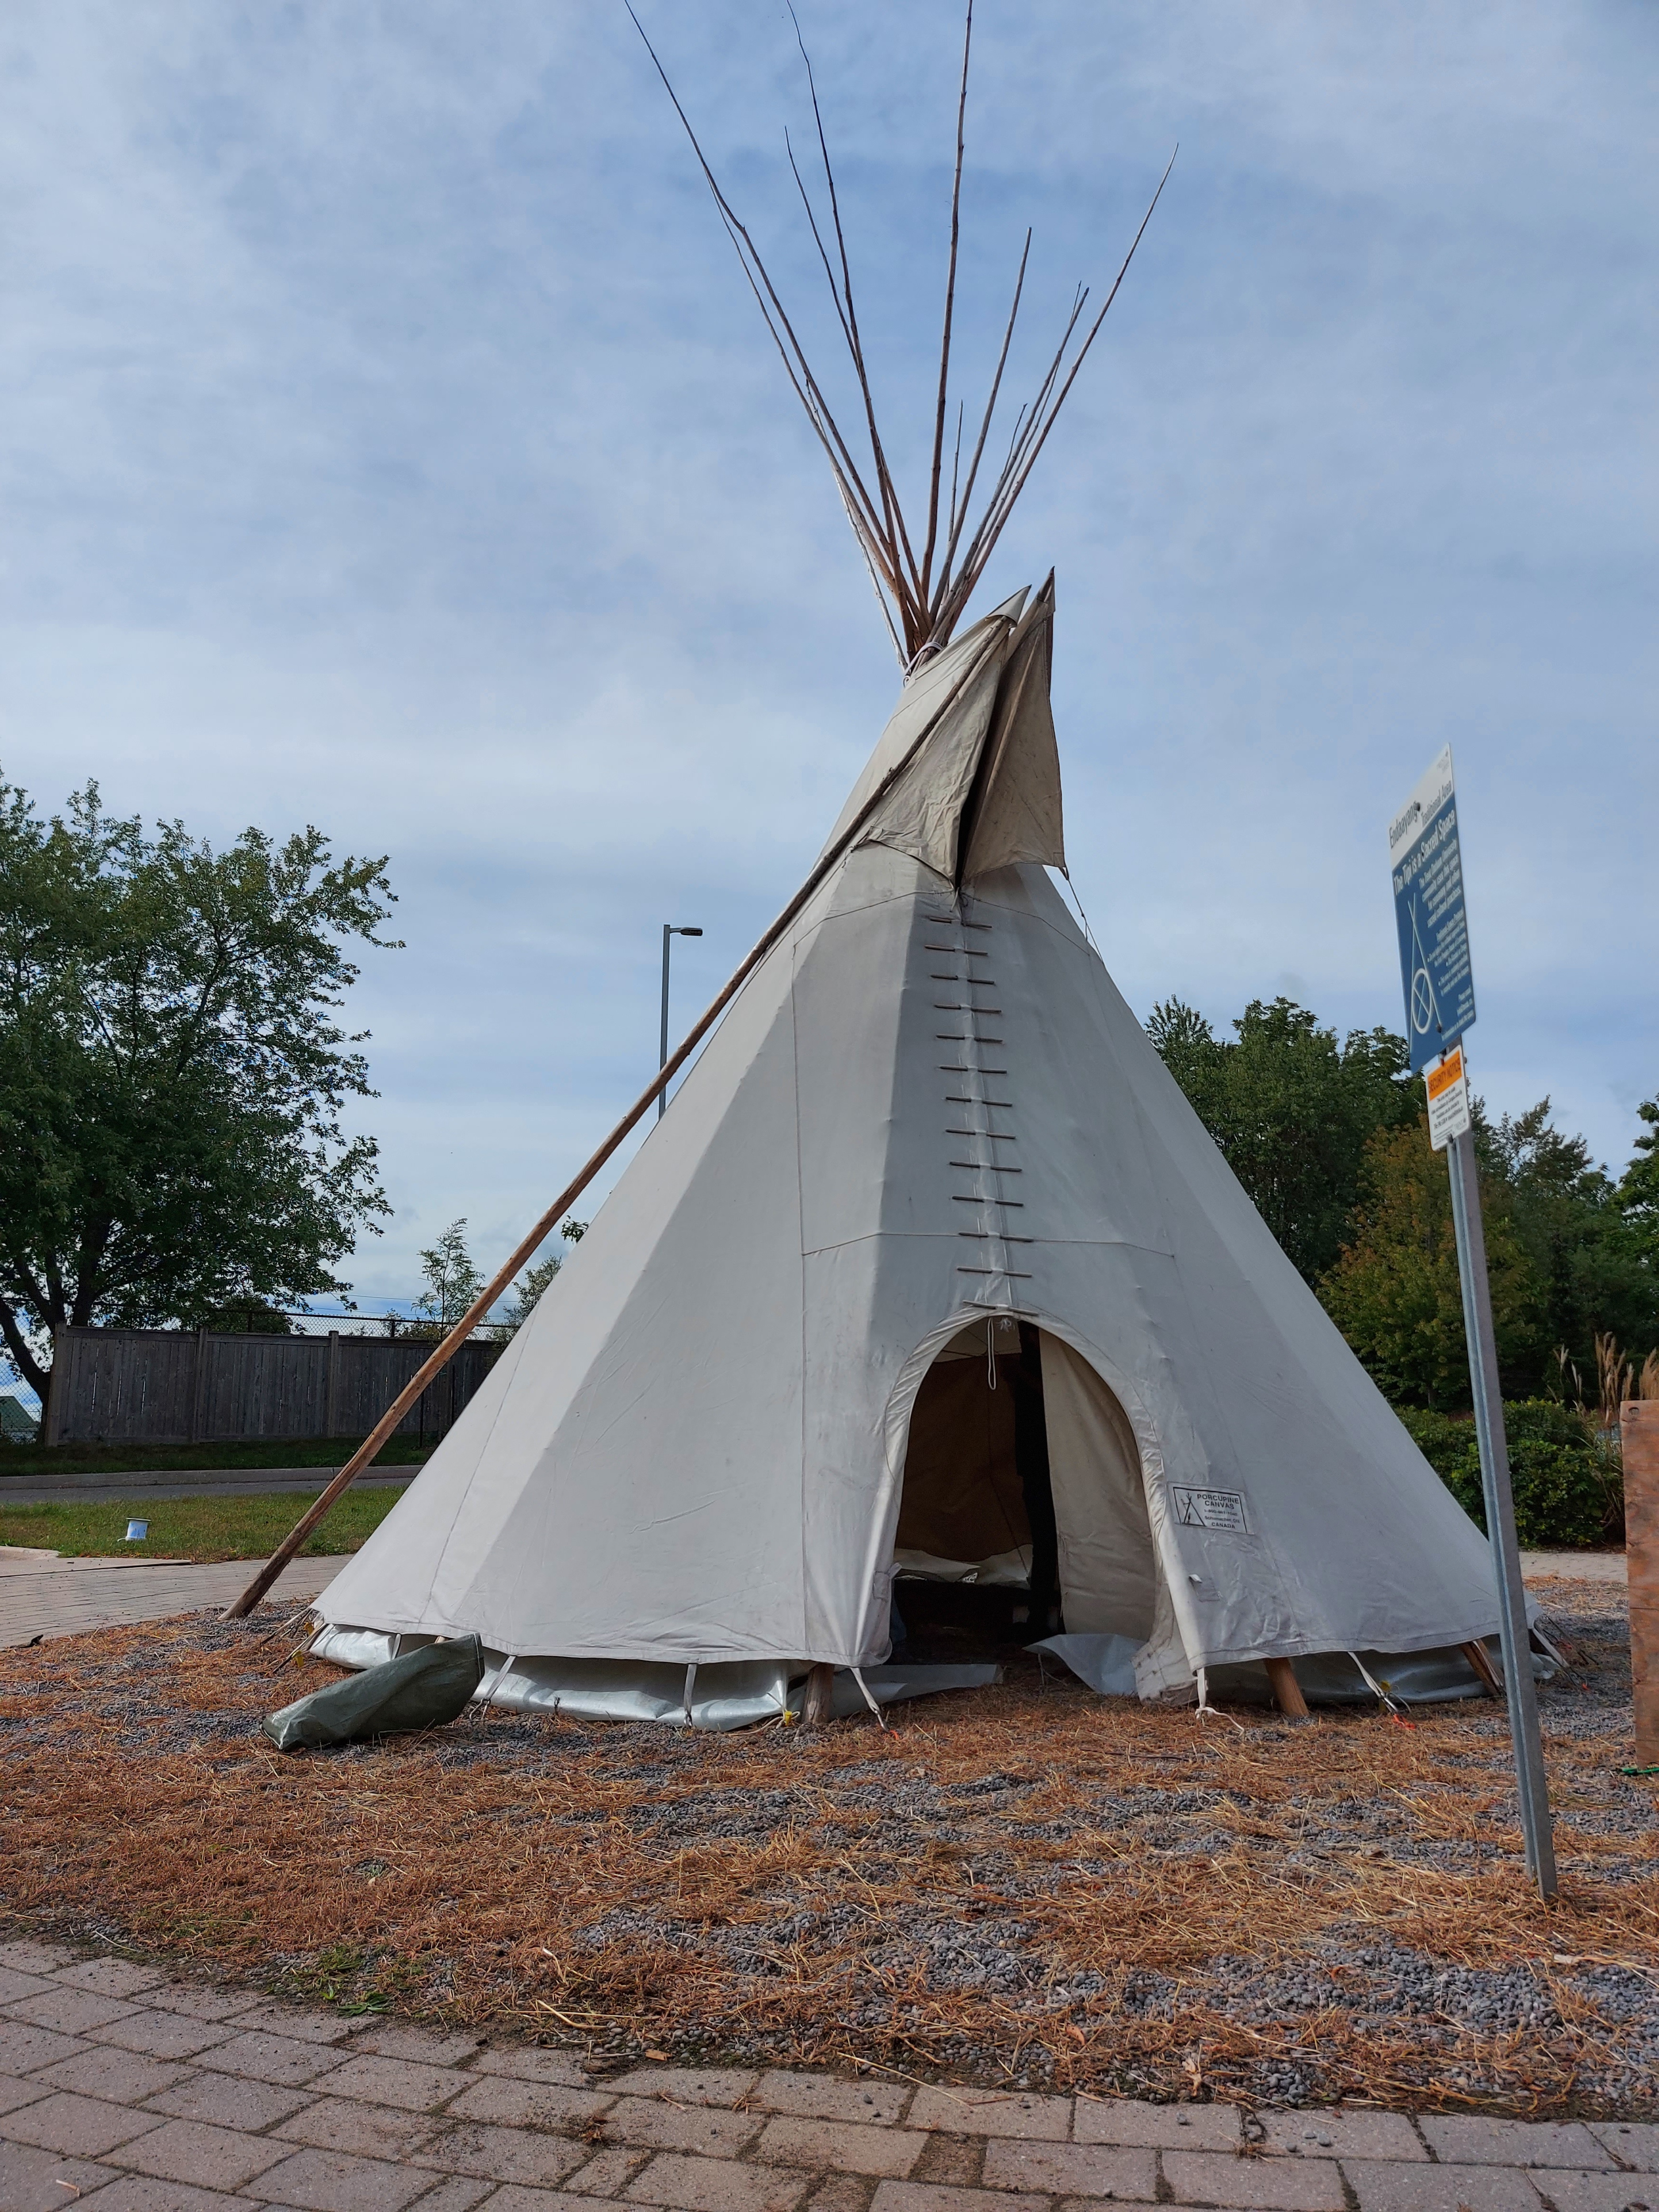 A picture of the tipi located at the Endaayang traditional area. There is a bright blue sky behind it, and the tipi sits upon gravel terrain with a concrete walkpath nearby.